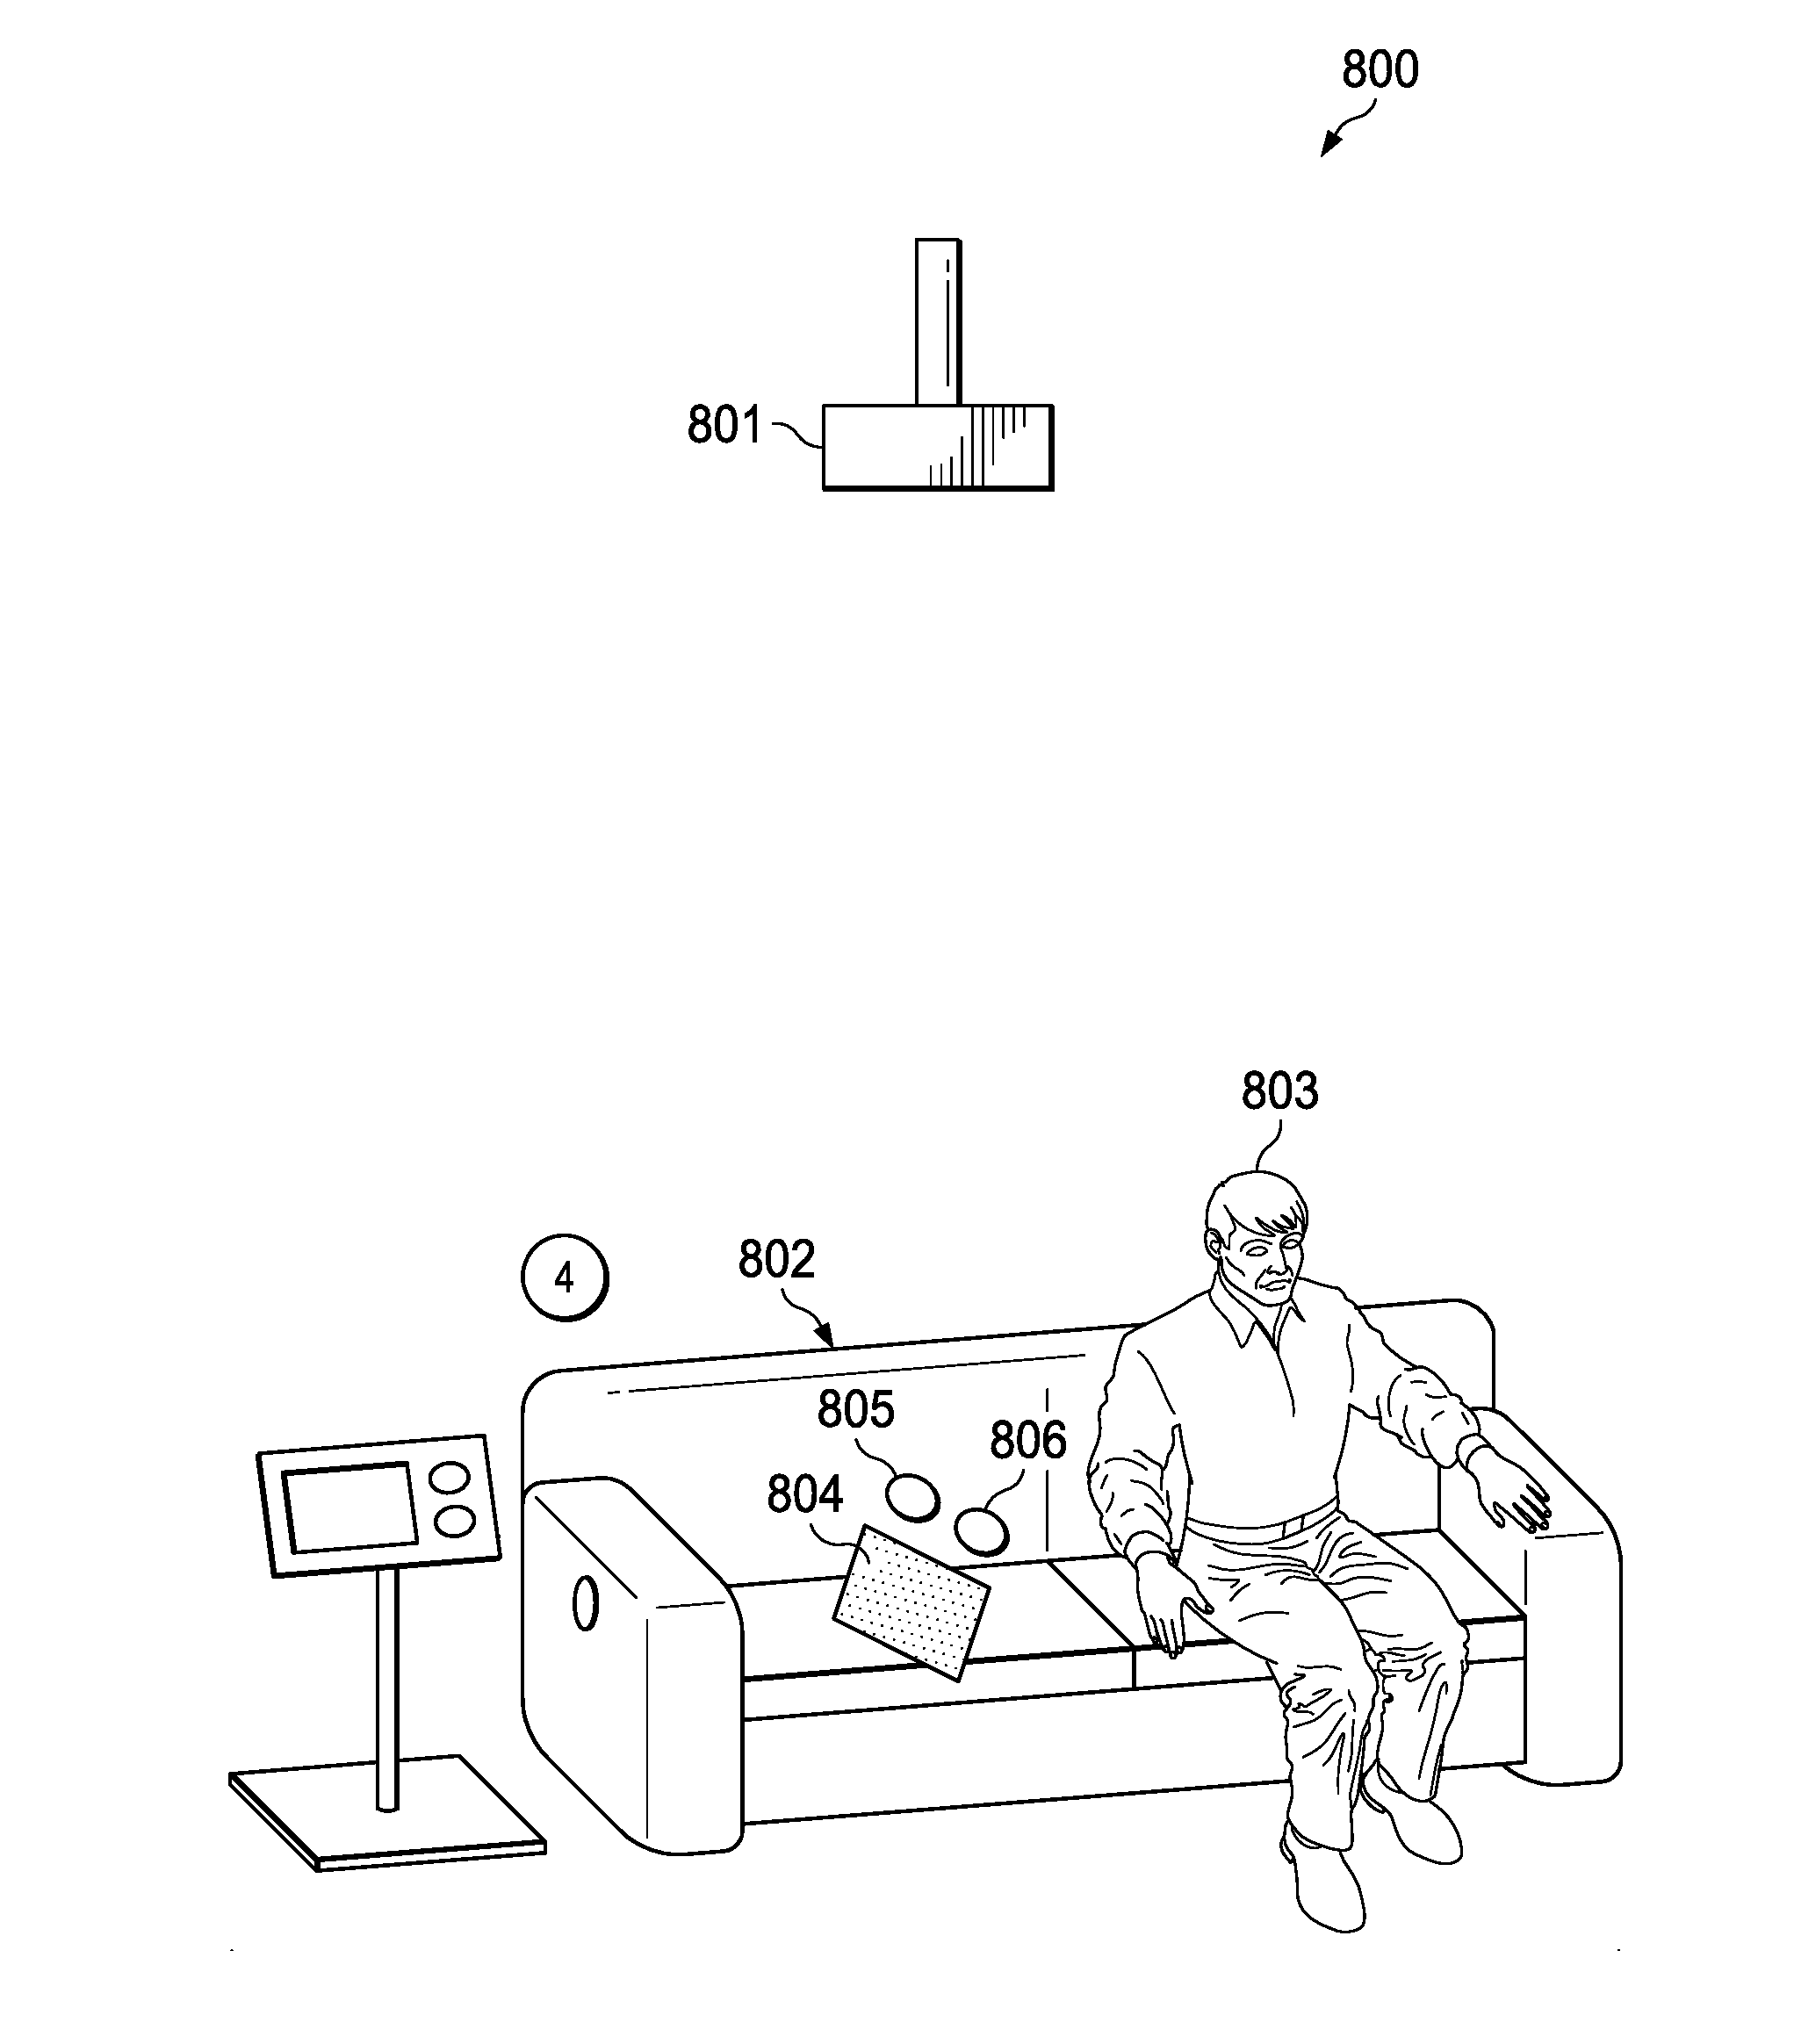 System and method for interactive projection